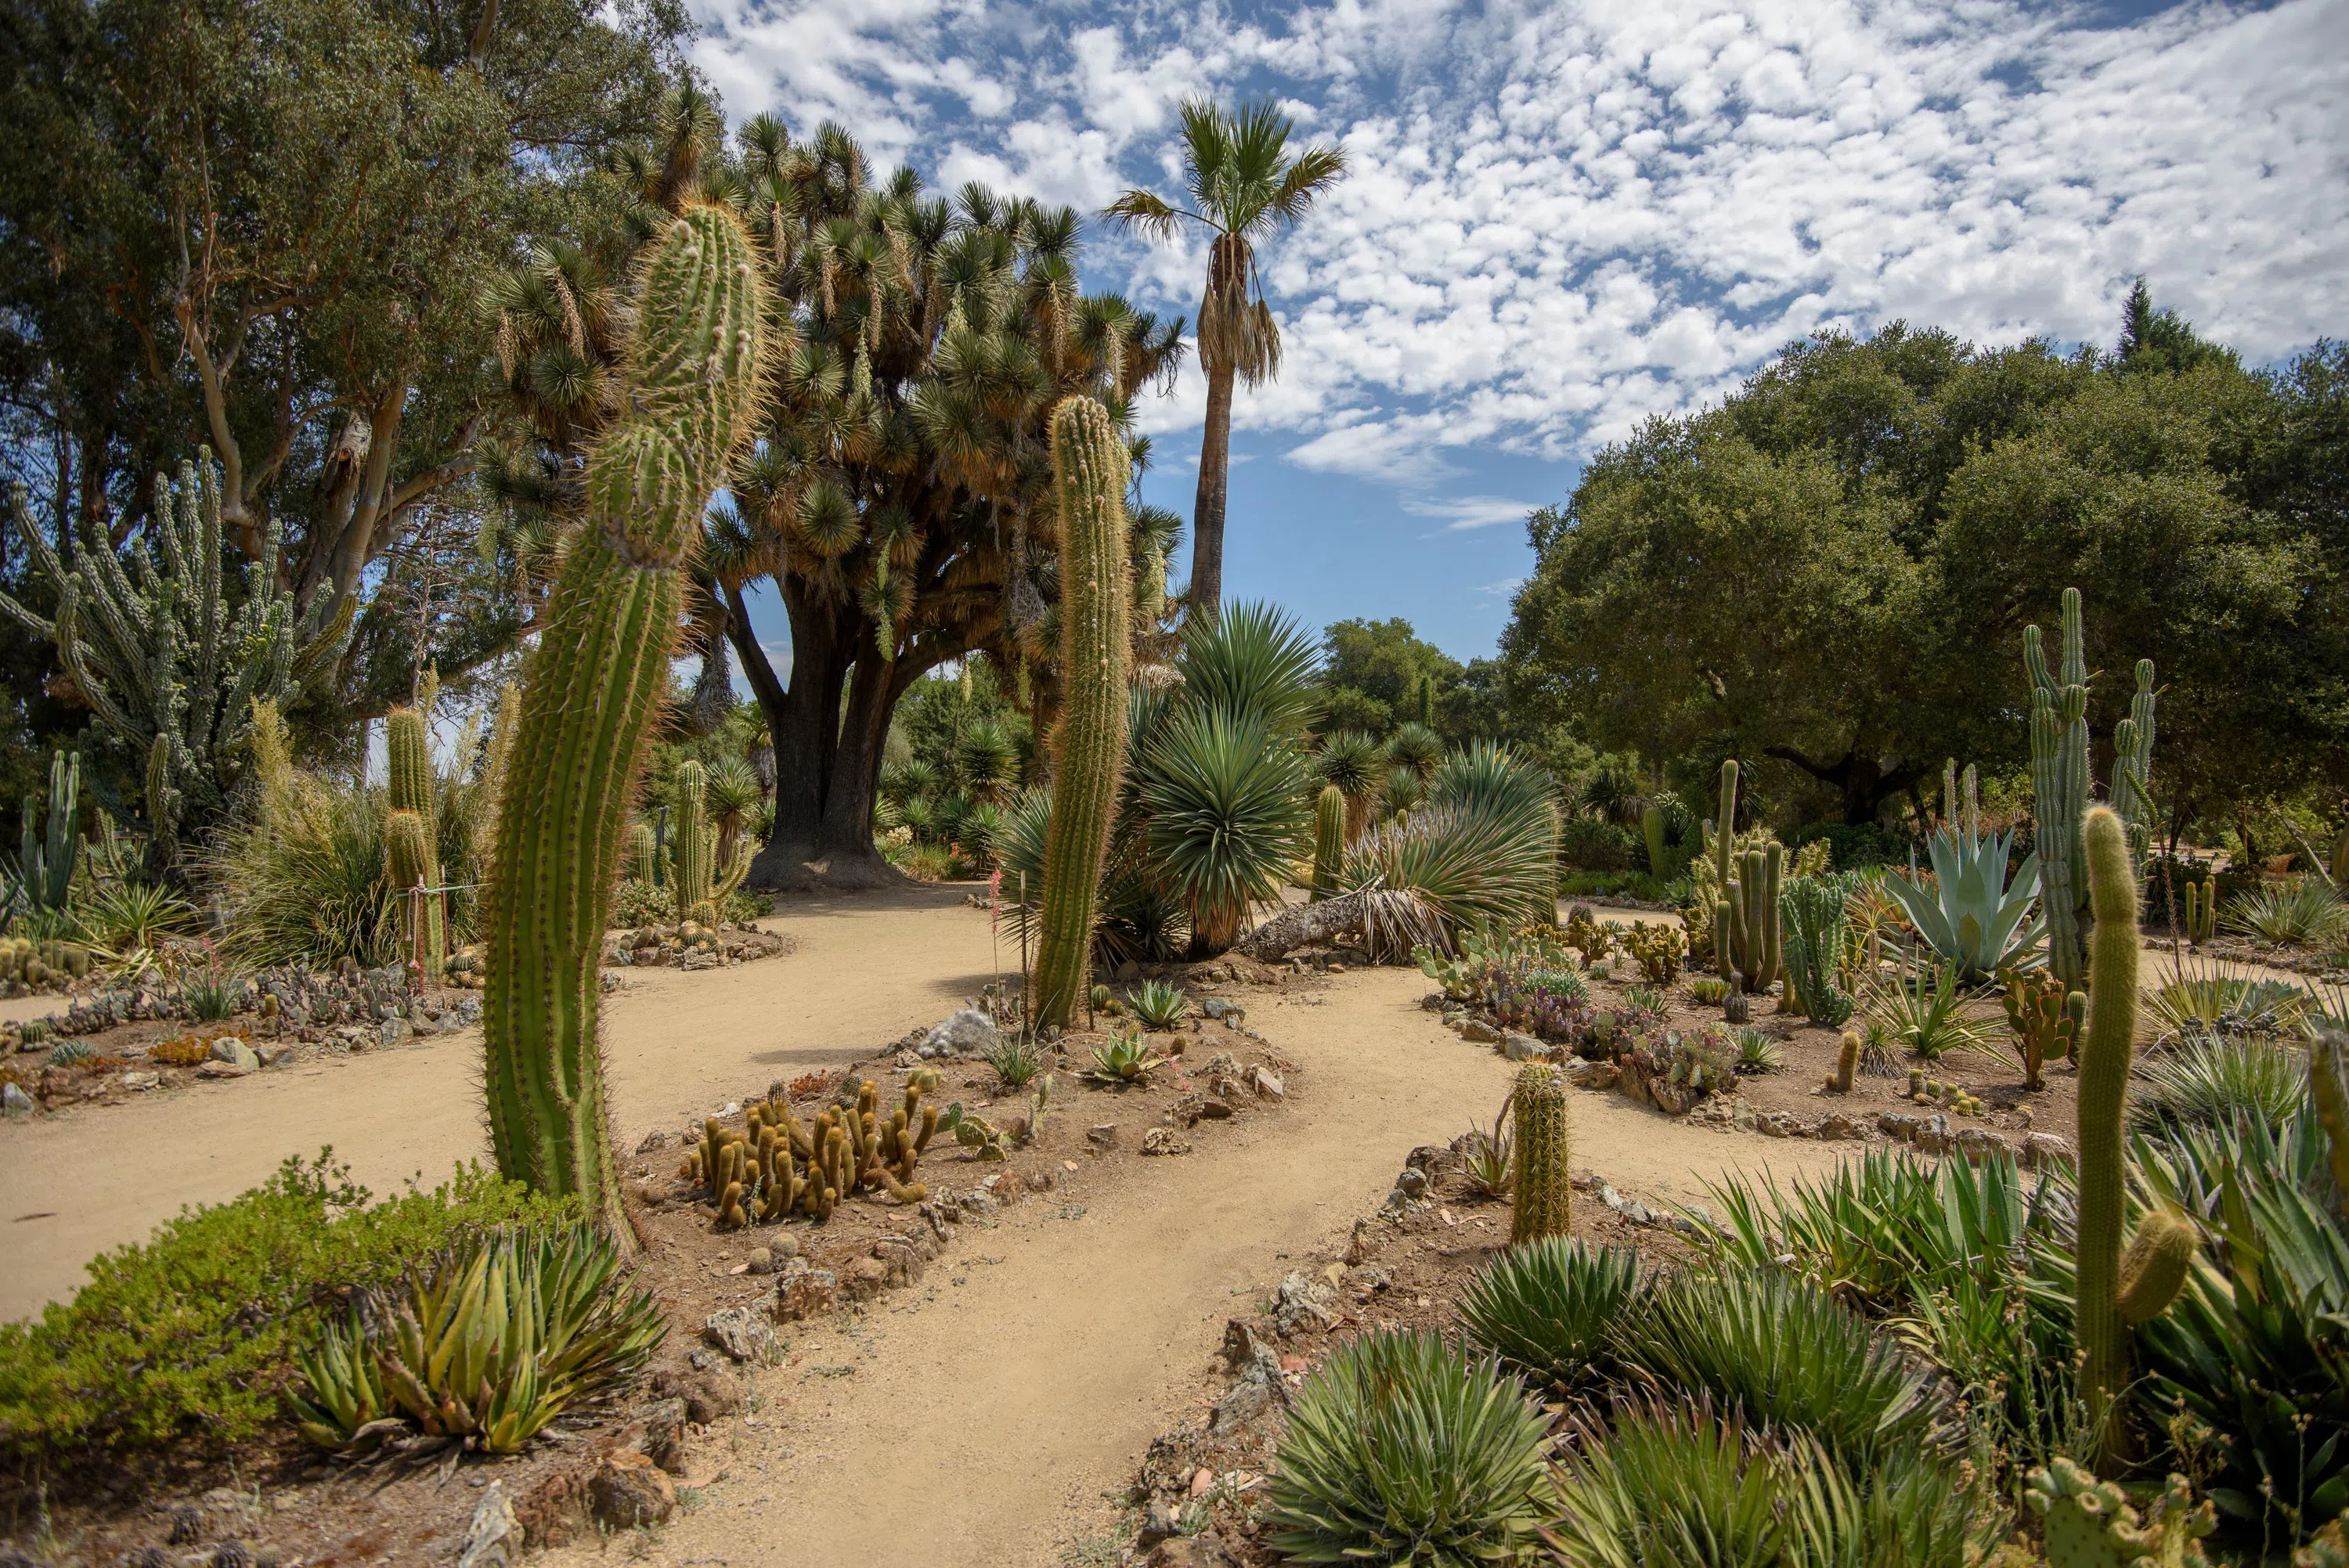 Multiple types of cactus and trees in an ornamental garden with pathways